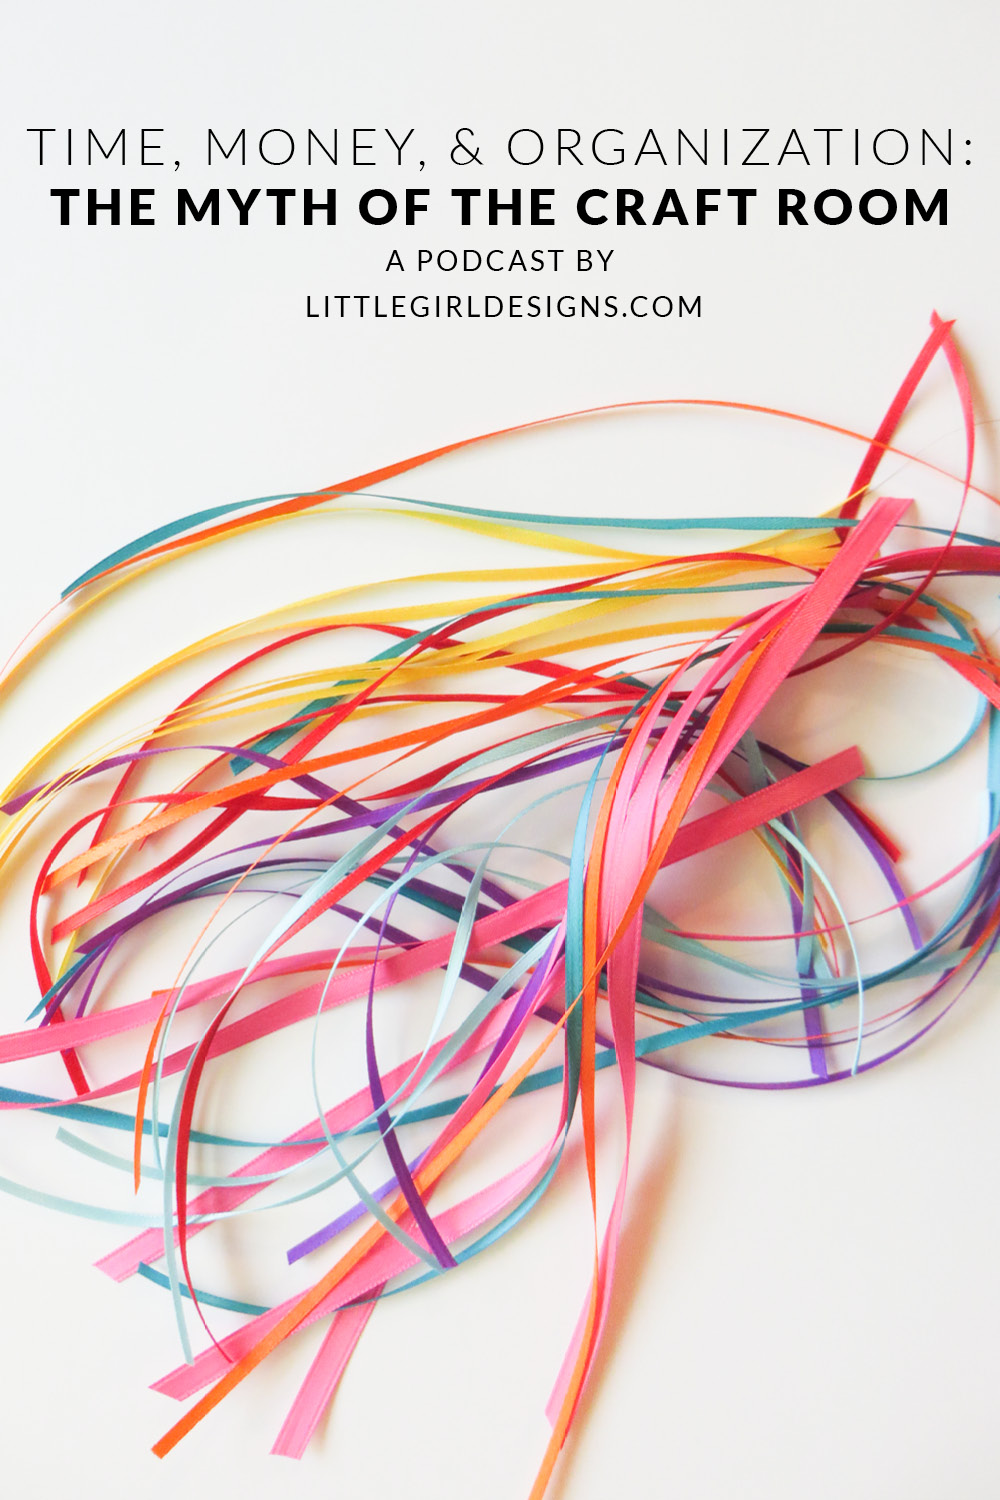 Time, Money, and Organization - The Myth of the Craft Room - Join me for this podcast (plus resource list) aimed at getting you and your craft/creativity supplies organized. I'll talk about the root cause behind your disorganization as well as share some tips on getting organized on a budget. via littlegirldesigns.com